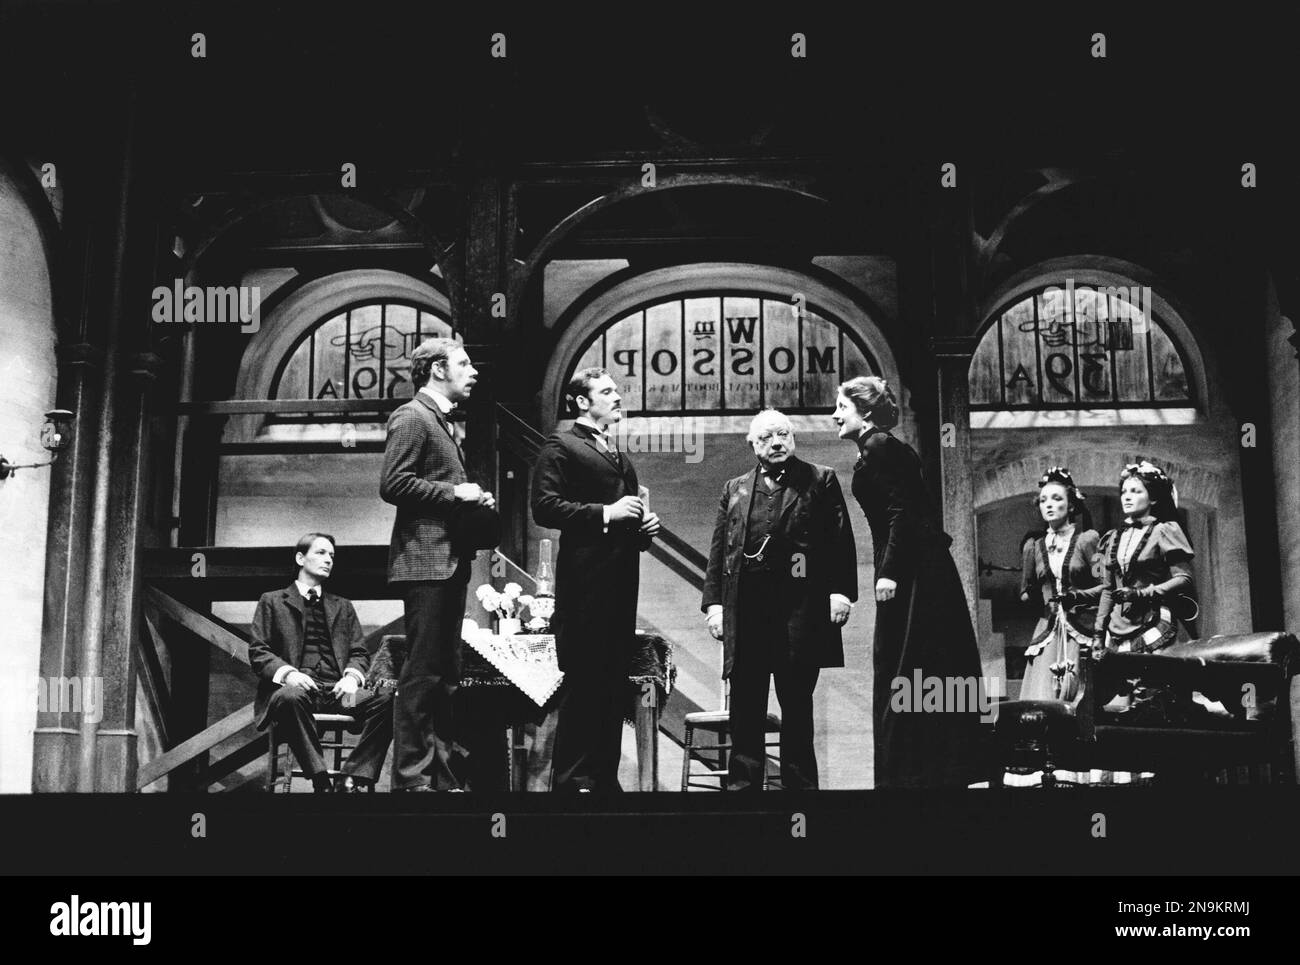 l-r: Ronald Pickup (William Mossop), Stephen Reynolds (Fred Beenstock), Roger Alborough (Albert Prosser), Arthur Lowe (Henry Horatio Hobson), Julia McKenzie (Maggie Hobson), Lesley Manville (Alice Hobson), Veronica Sowerby (Vickey Hobson) in HOBSON'S CHOICE by Harold Brighouse at the Lyric Theatre Hammersmith, London W6  02/02/1981  set design: Kenneth Mellor  costumes: Mark Negin  lighting: Mark Dawson  director: David Giles Stock Photo